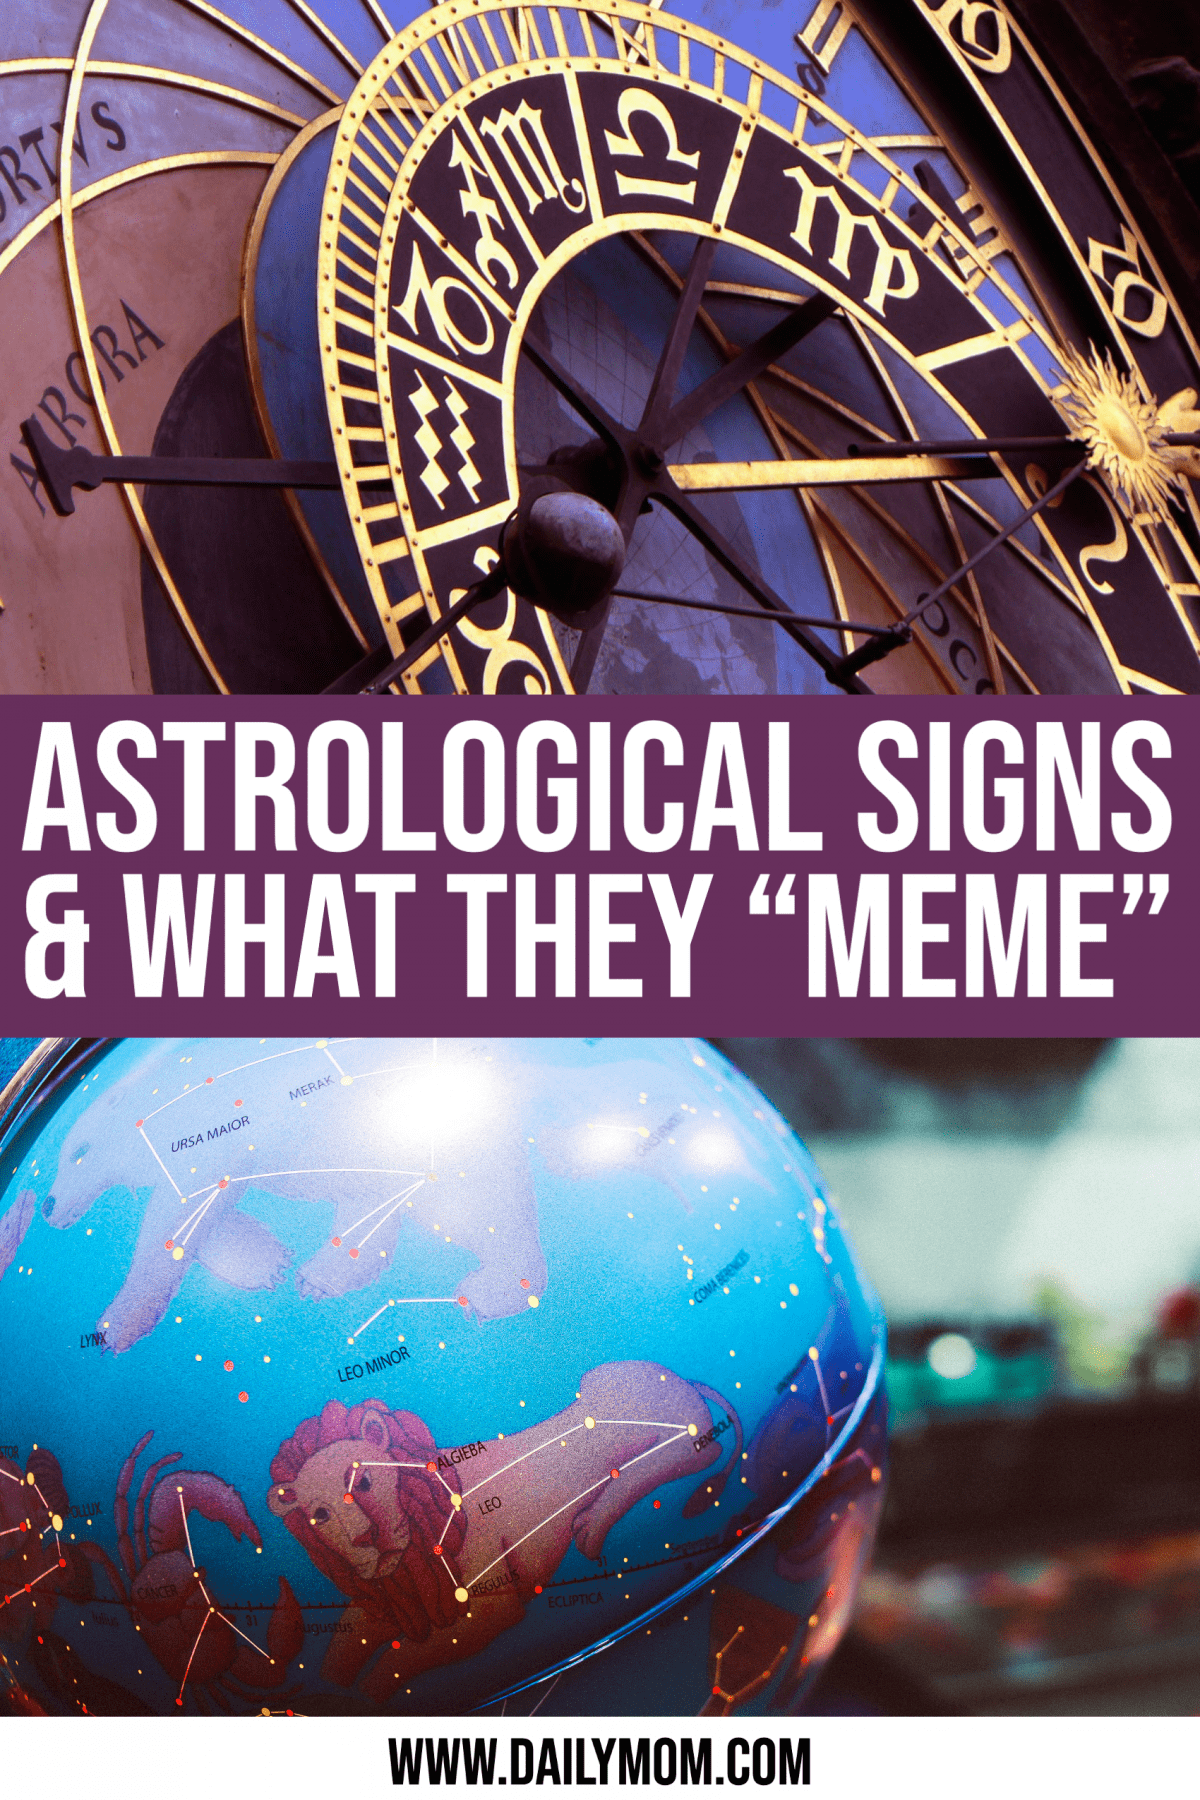 Astrological Signs Of The Zodiac & What They “meme”